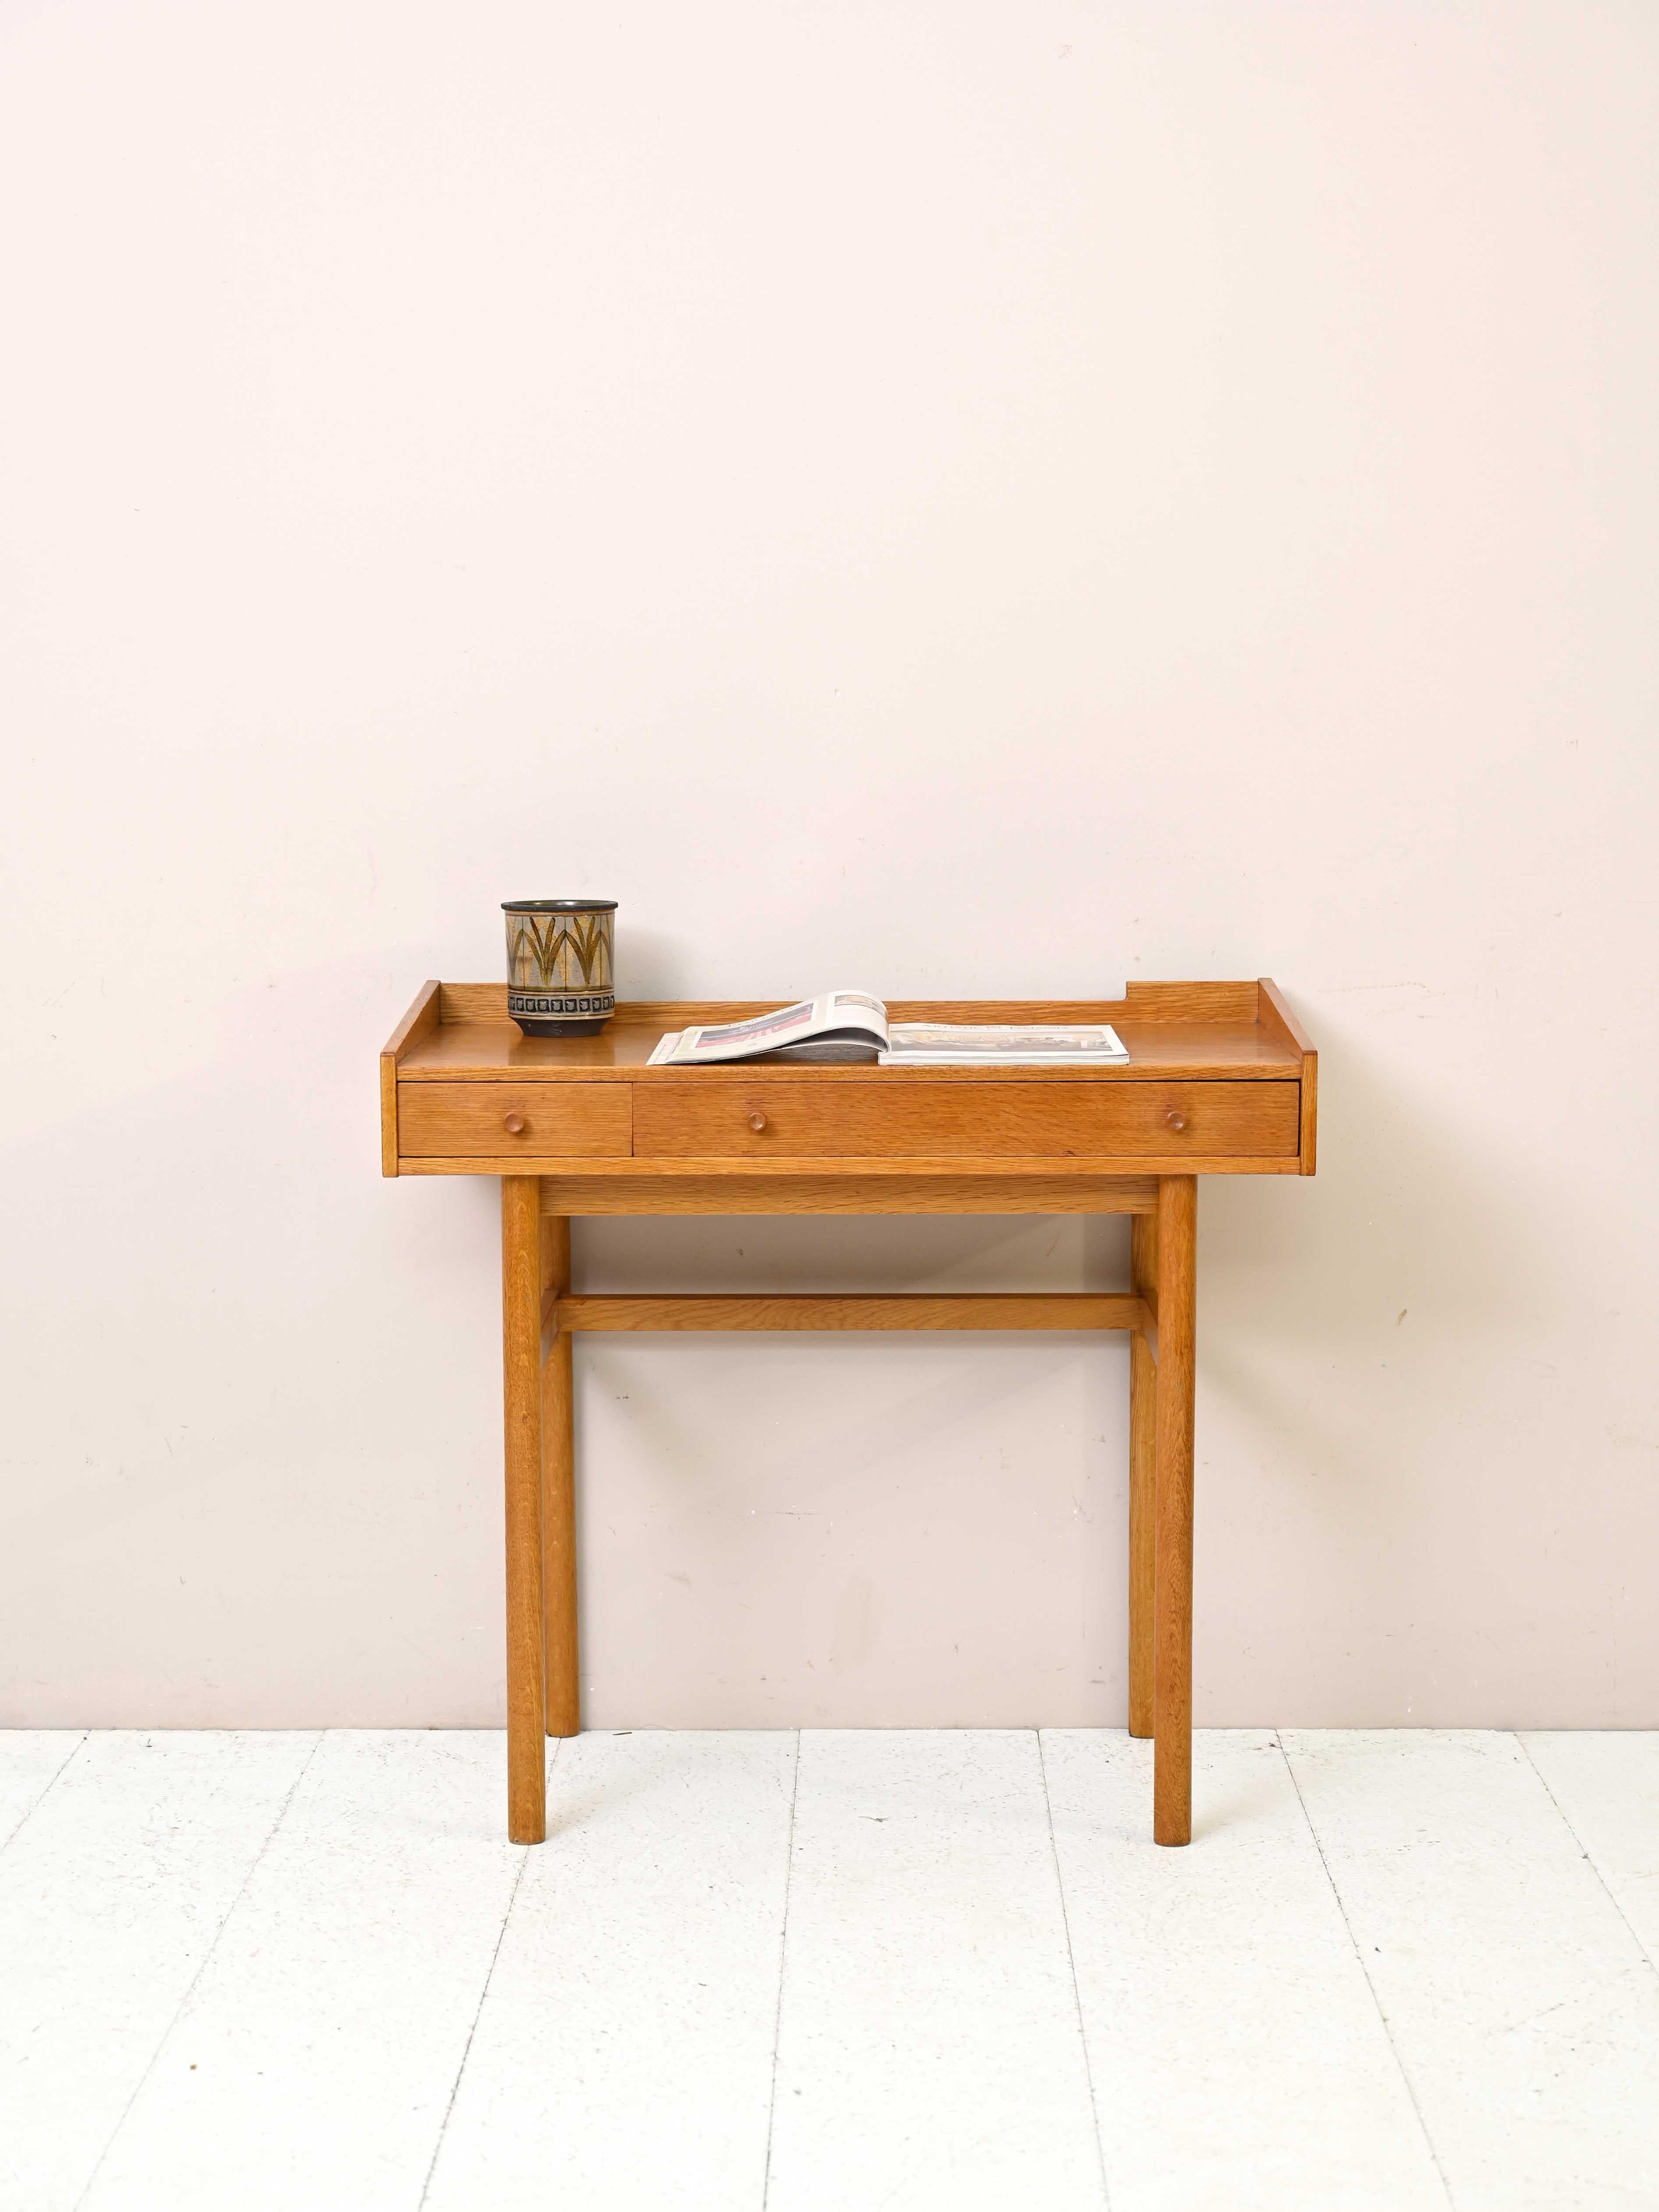 Swedish vintage oak desk with drawers.

This small-sized desk is perfect for recreating a small study corner in the home.
The simple lines and light color of the oak wood make it a modern piece of furniture that will enrich your home in an